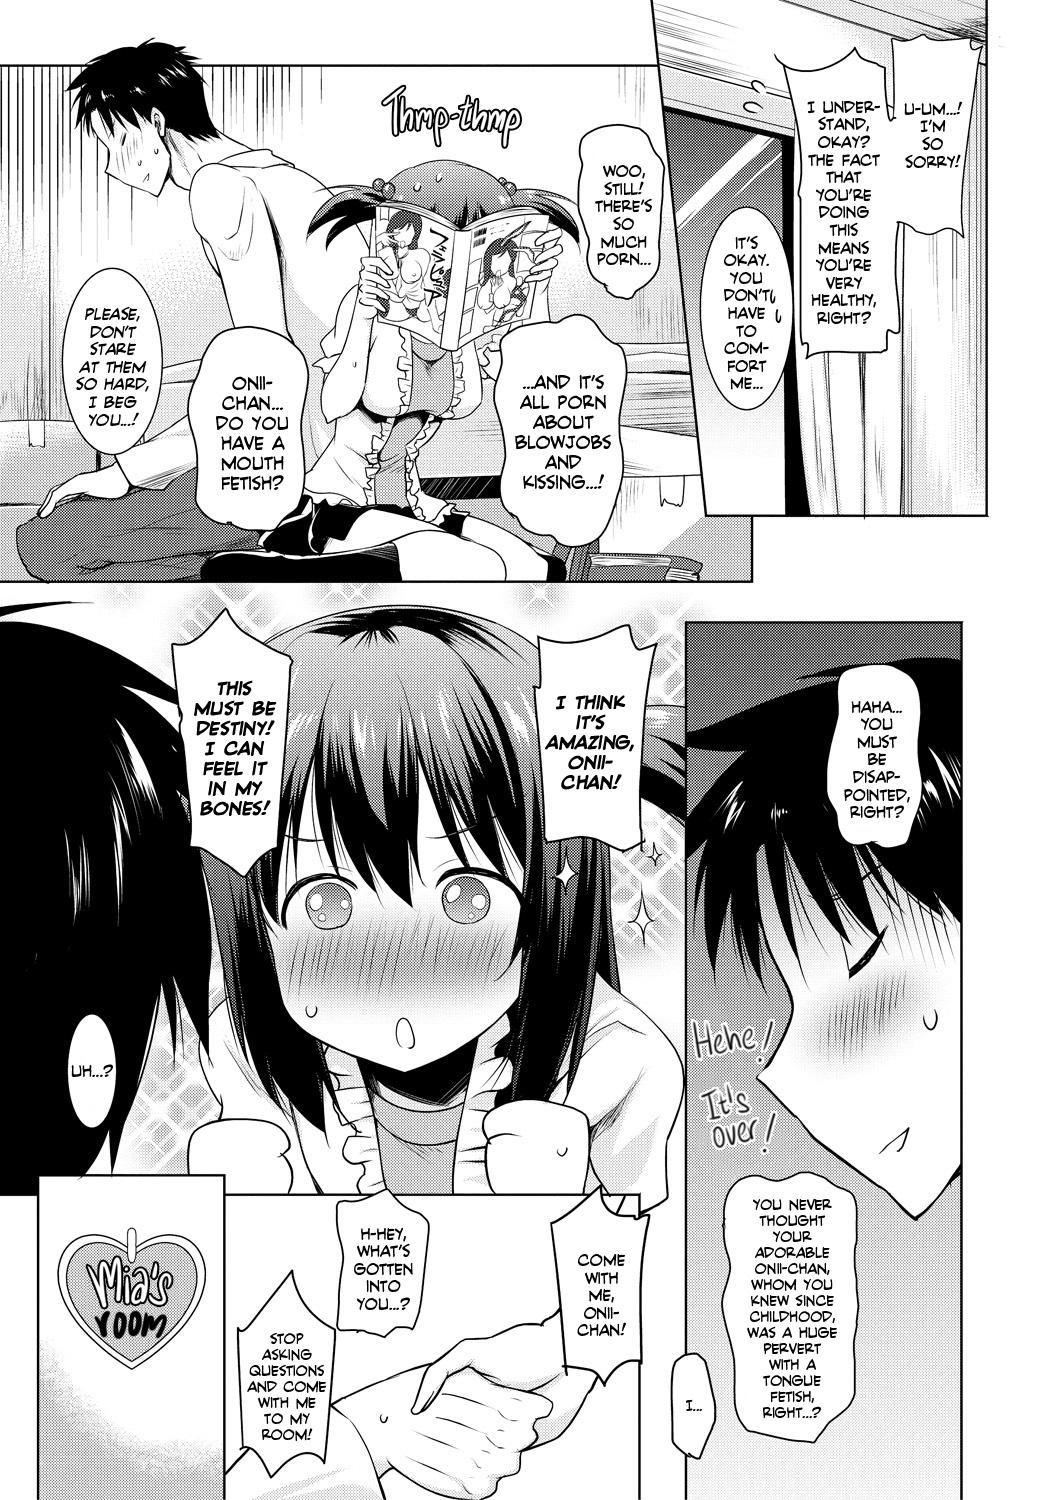 [Pony-R] I Can't Live Without My Little Sister's Tongue Chapter 01-02 + Secret Baby-making Sex with a Big-titted Mother and Daughter! (Kyonyuu Oyako no Shita to Shikyuu ni Renzoku Shasei) [English] [Team Rabu2] [Digital] 9